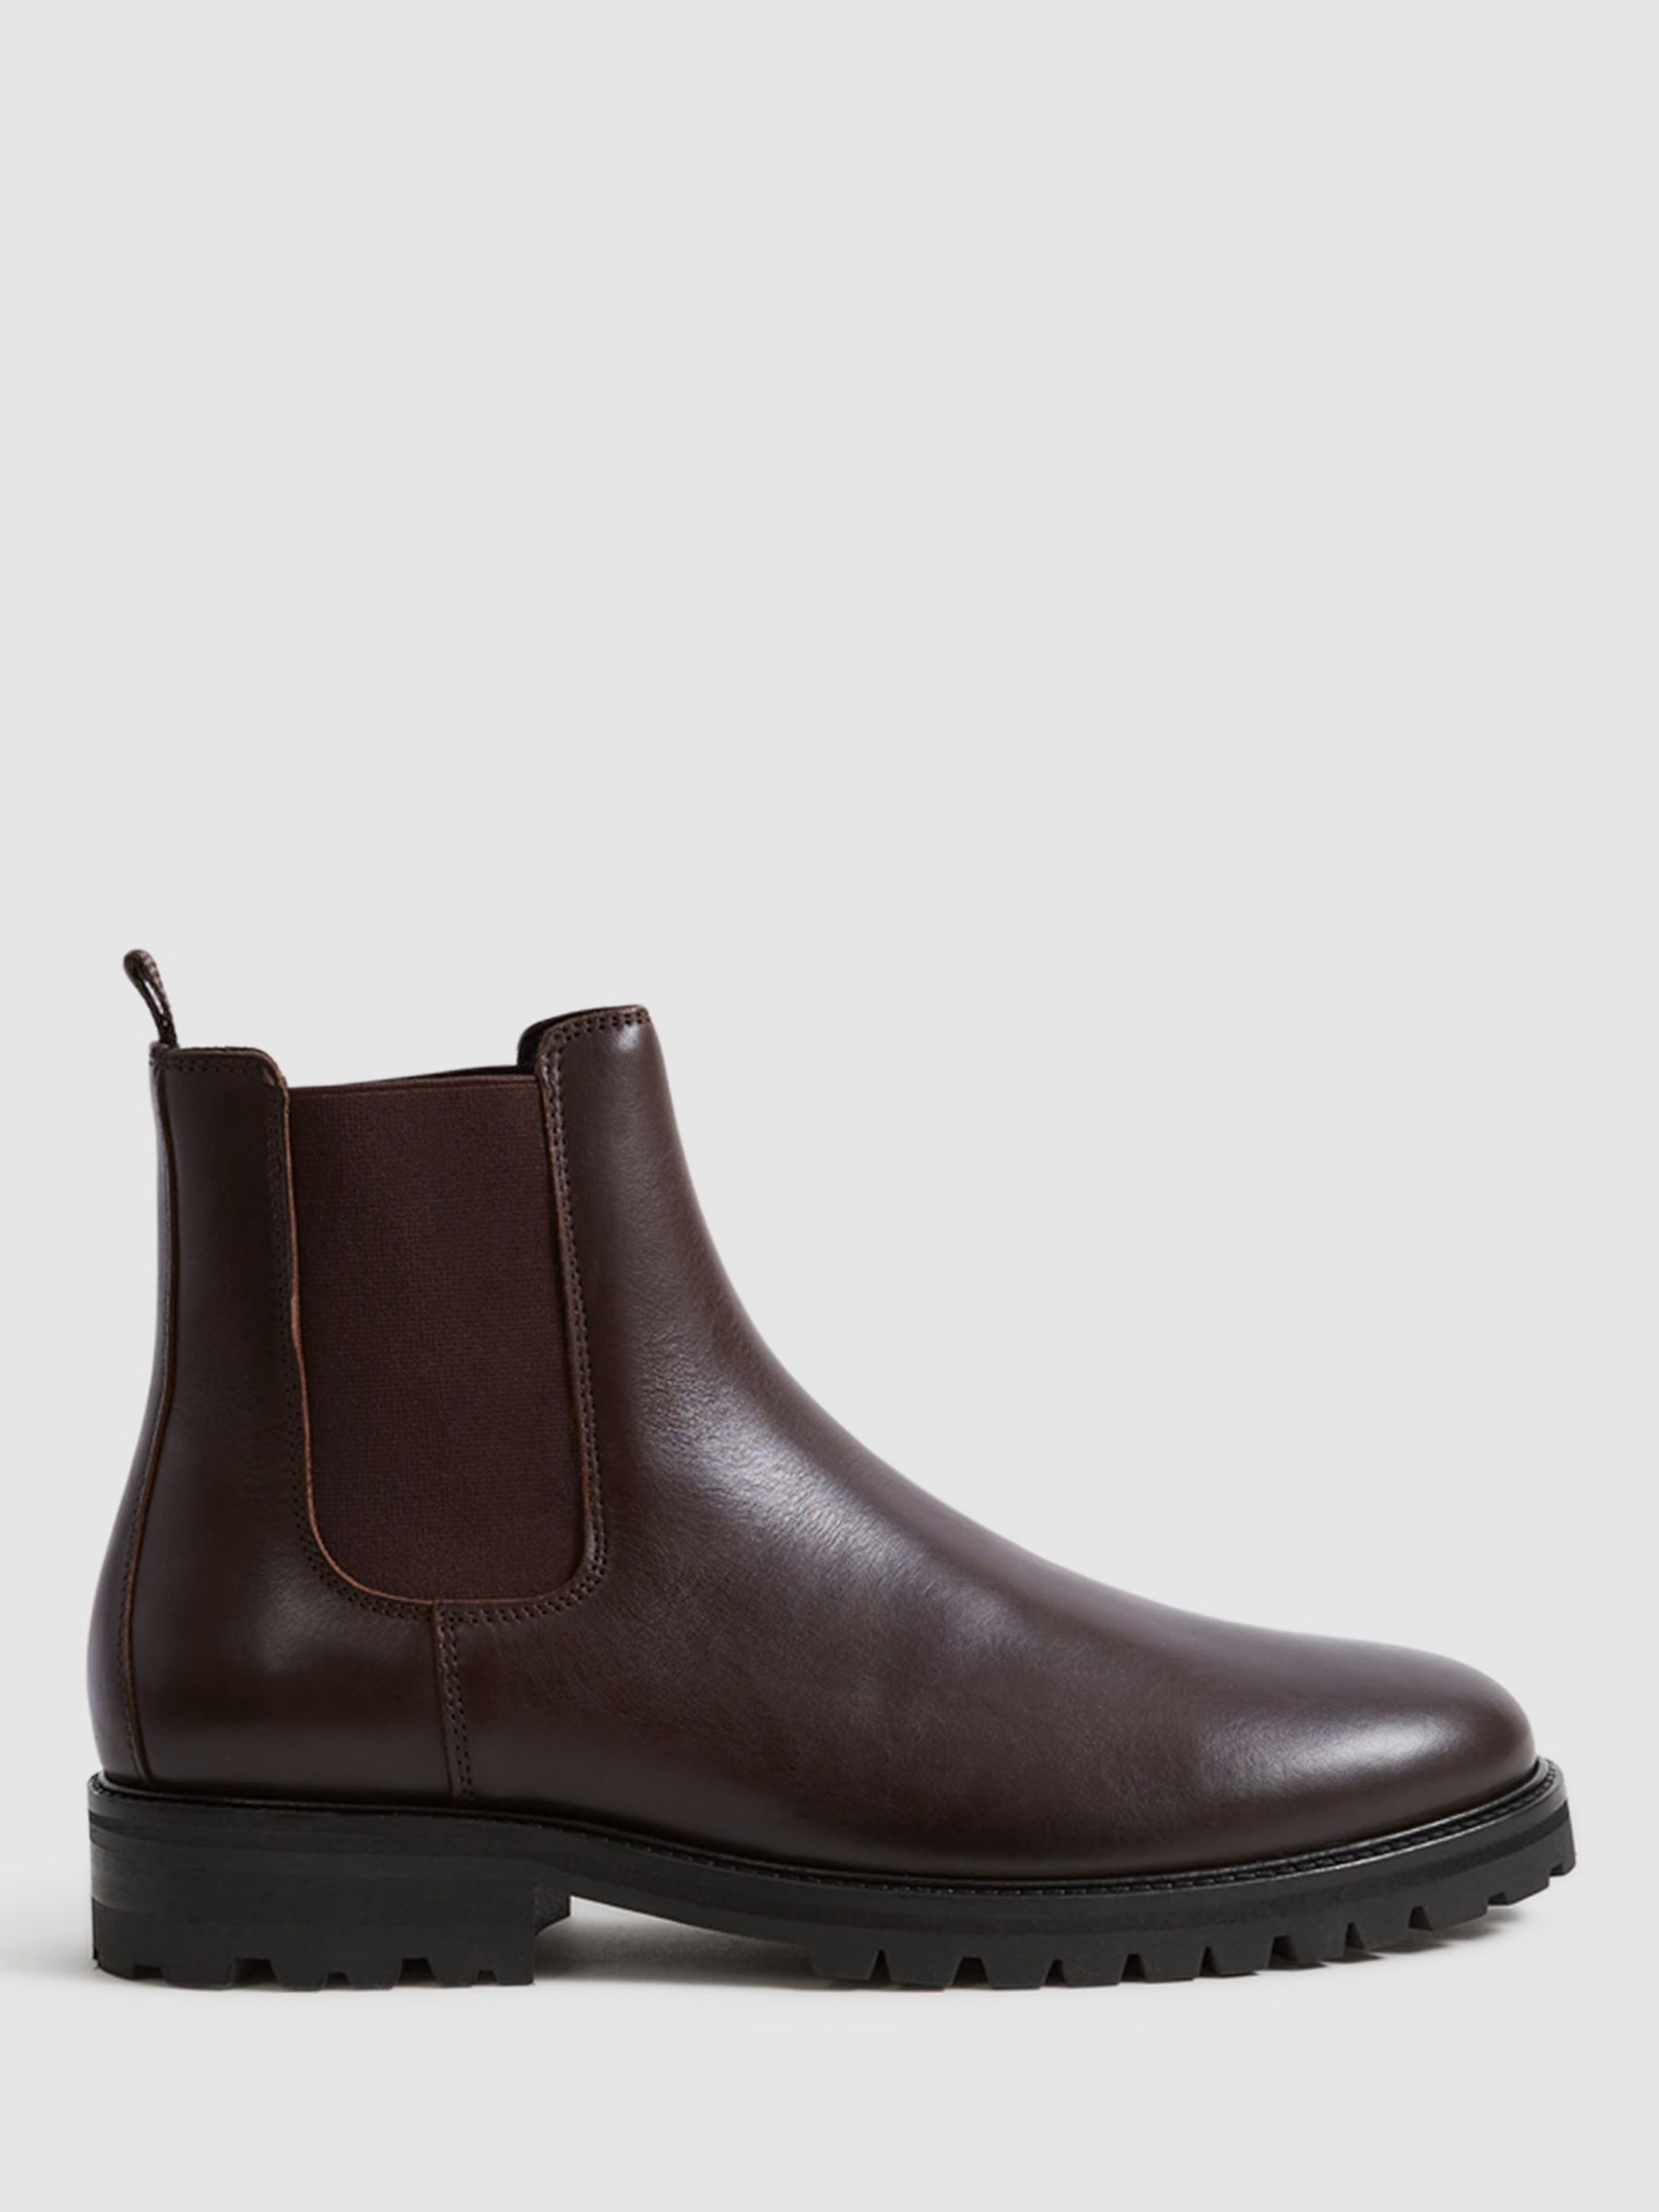 Reiss Chiltern Leather Chelsea Boots, Chocolate at John Lewis & Partners